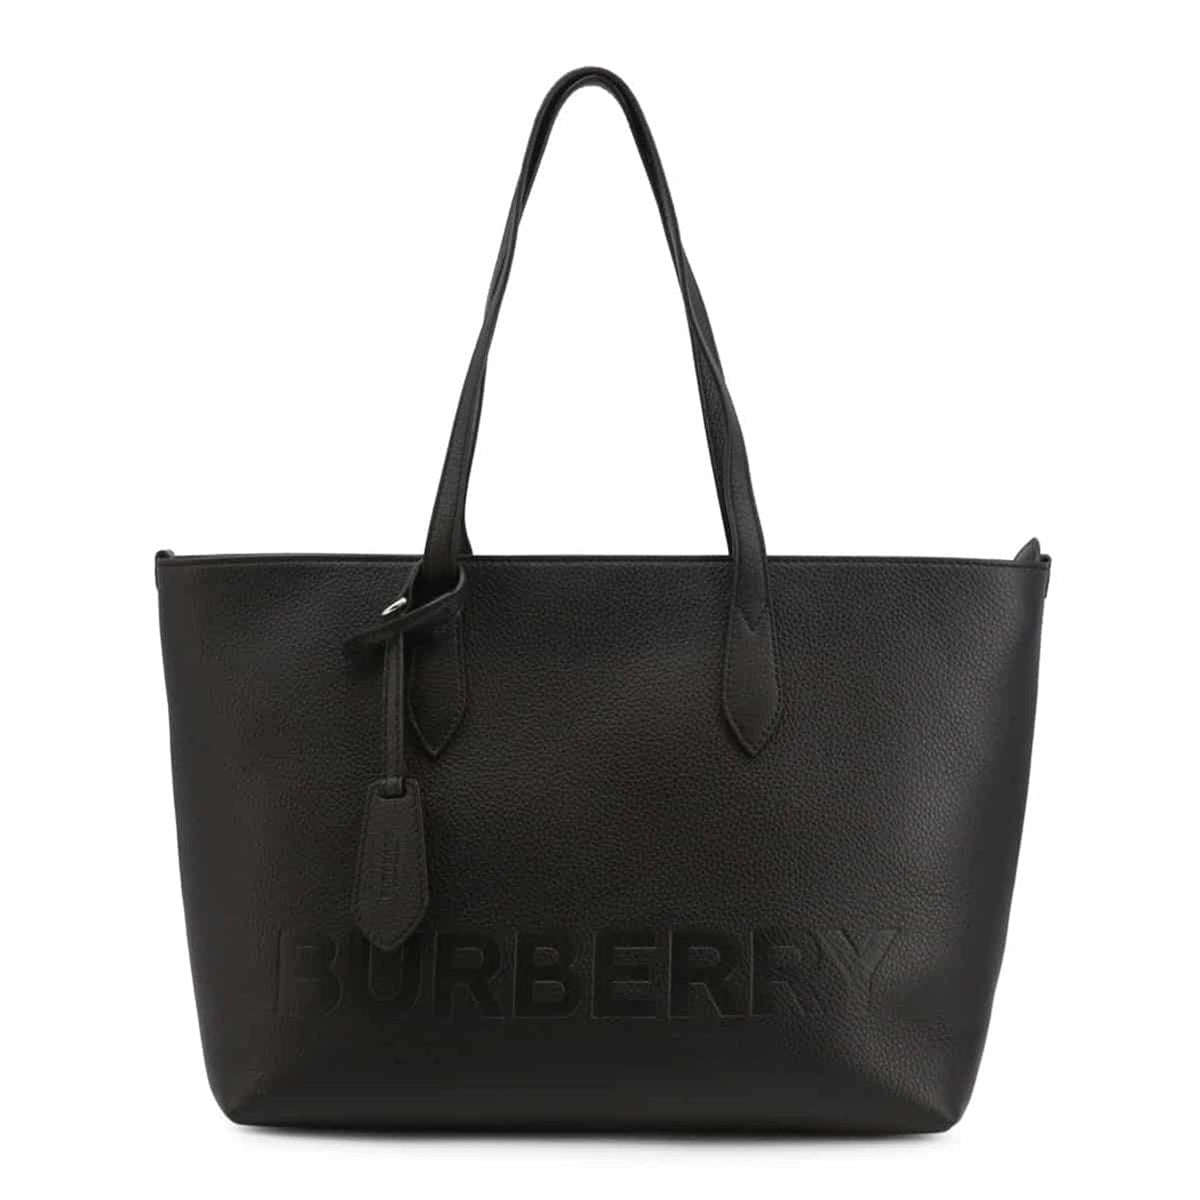 Burberry Shopping bags